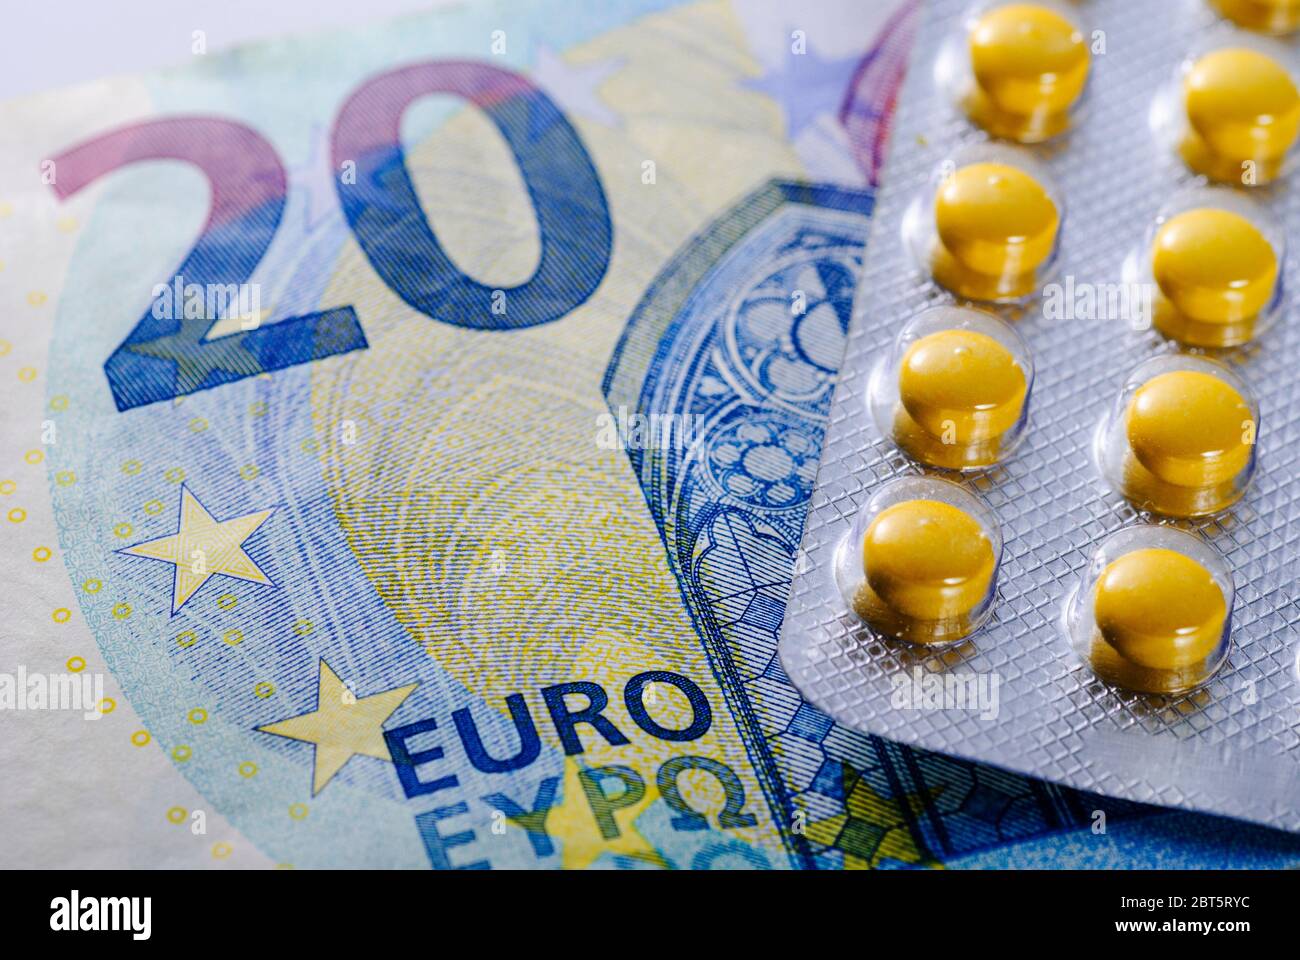 Sealed blister pack of pills on a 20 Euro note in a concept of the coast of treatment, medicine or healthcare in a full frame close up Stock Photo